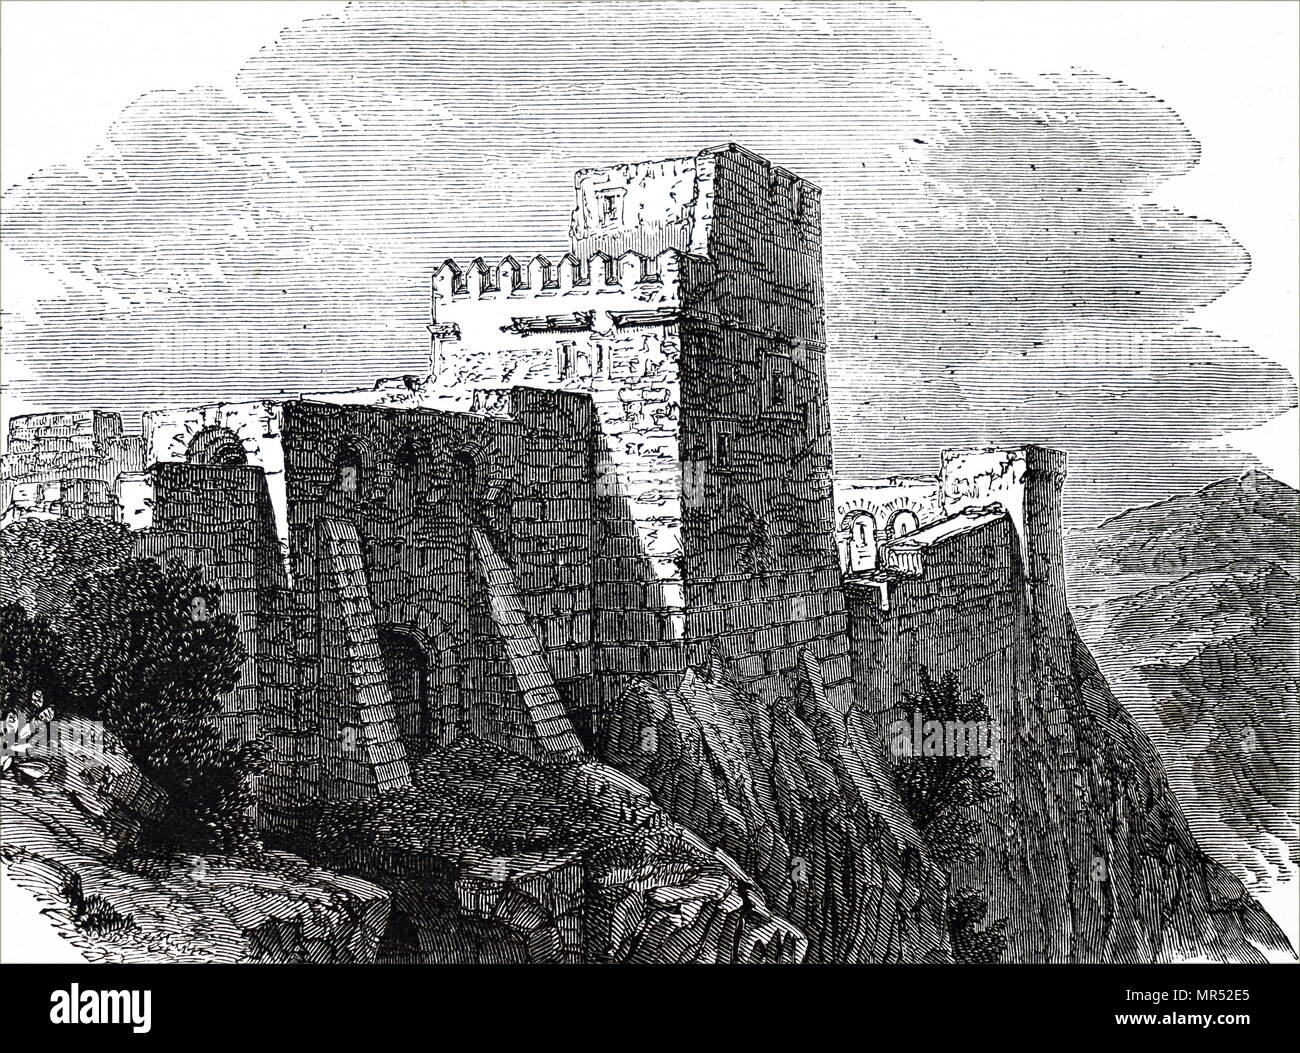 Illustration depicting a view of Hebron, a Palestinian city located in the southern West Bank, showing part of the walls, including the Towers of Judea. Dated 19th century Stock Photo